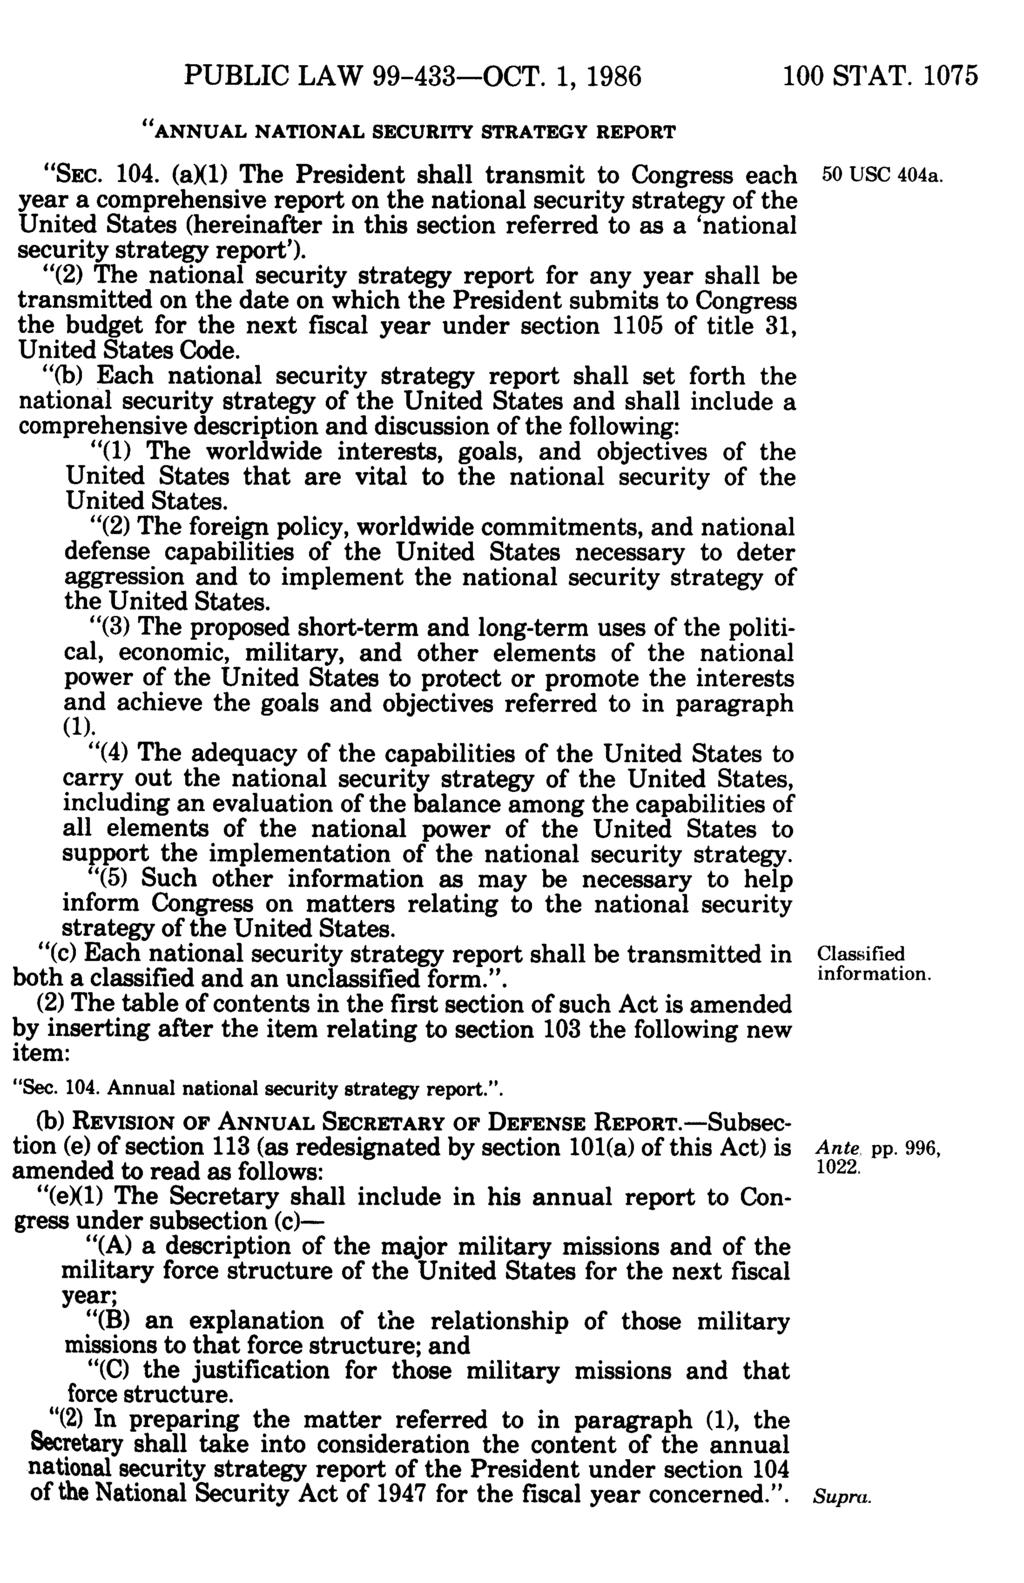 PUBLIC LAW 99-433-OCT. 1986 1, 100 STAT. 1075 ANNUAL NATIONAL SECURITY STRATEGY REPORT SEC. 104. (a)(1) The President shall transmit to Congress each 50 USC 404a.